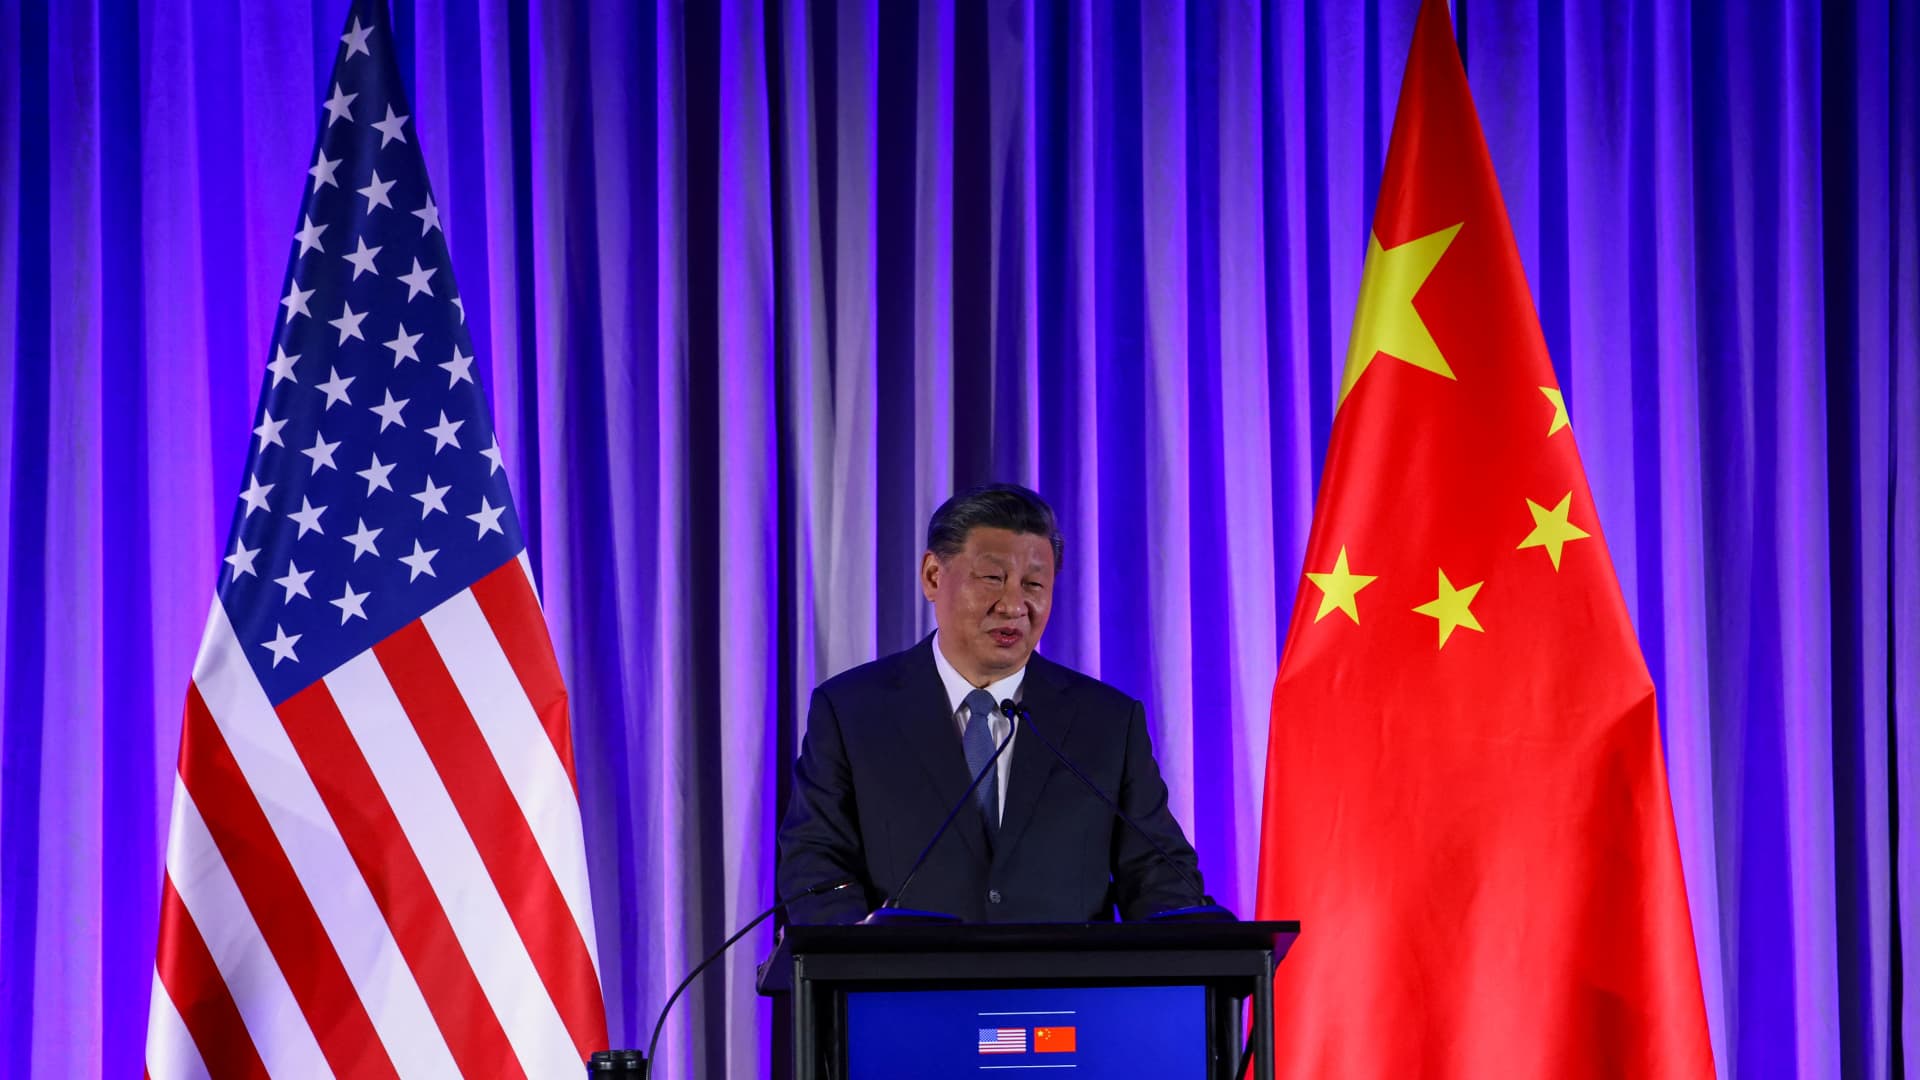 The division in the American and Chinese trading bloc threatens a 'reversal' for the global economy